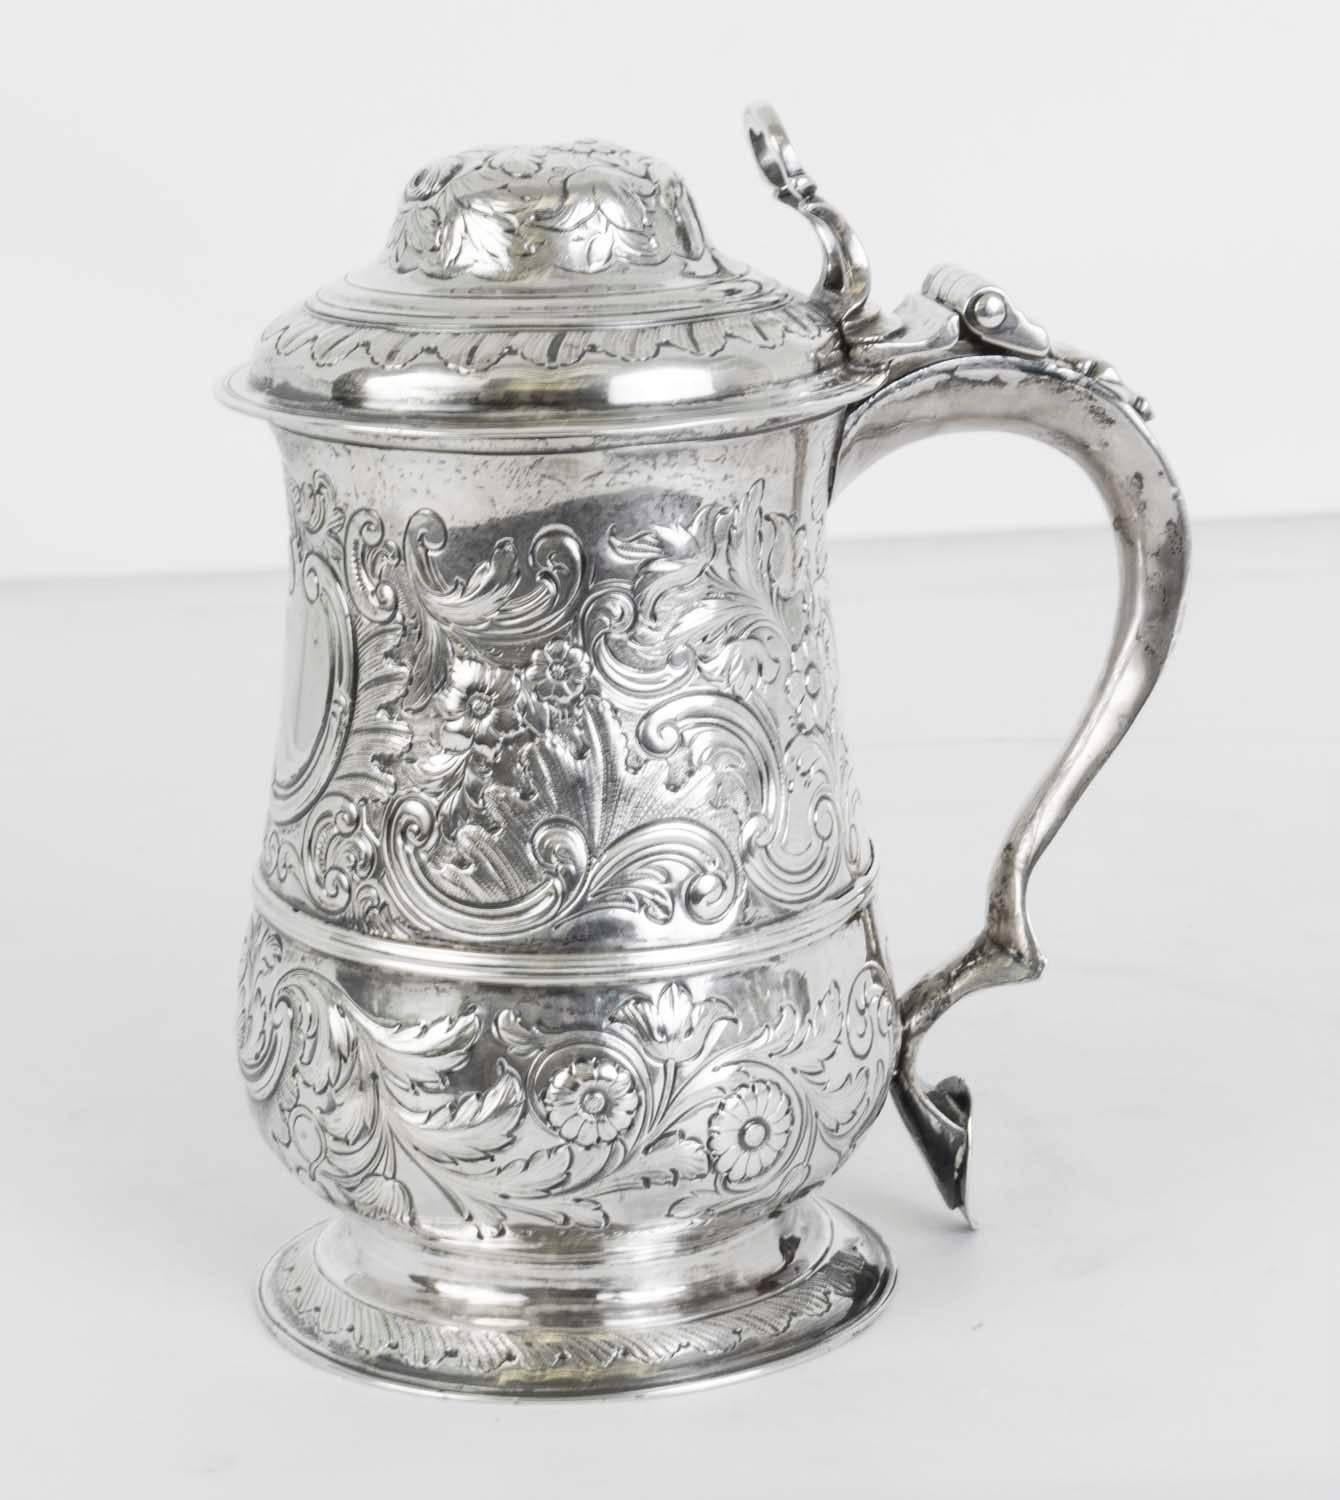 This is a wonderful antique English George III silver lidded tankard with hallmarks for London, 1773 and the makers mark of the renowned silversmiths John King.

The tankard has wonderful embossed floral decorations throughout with a blank